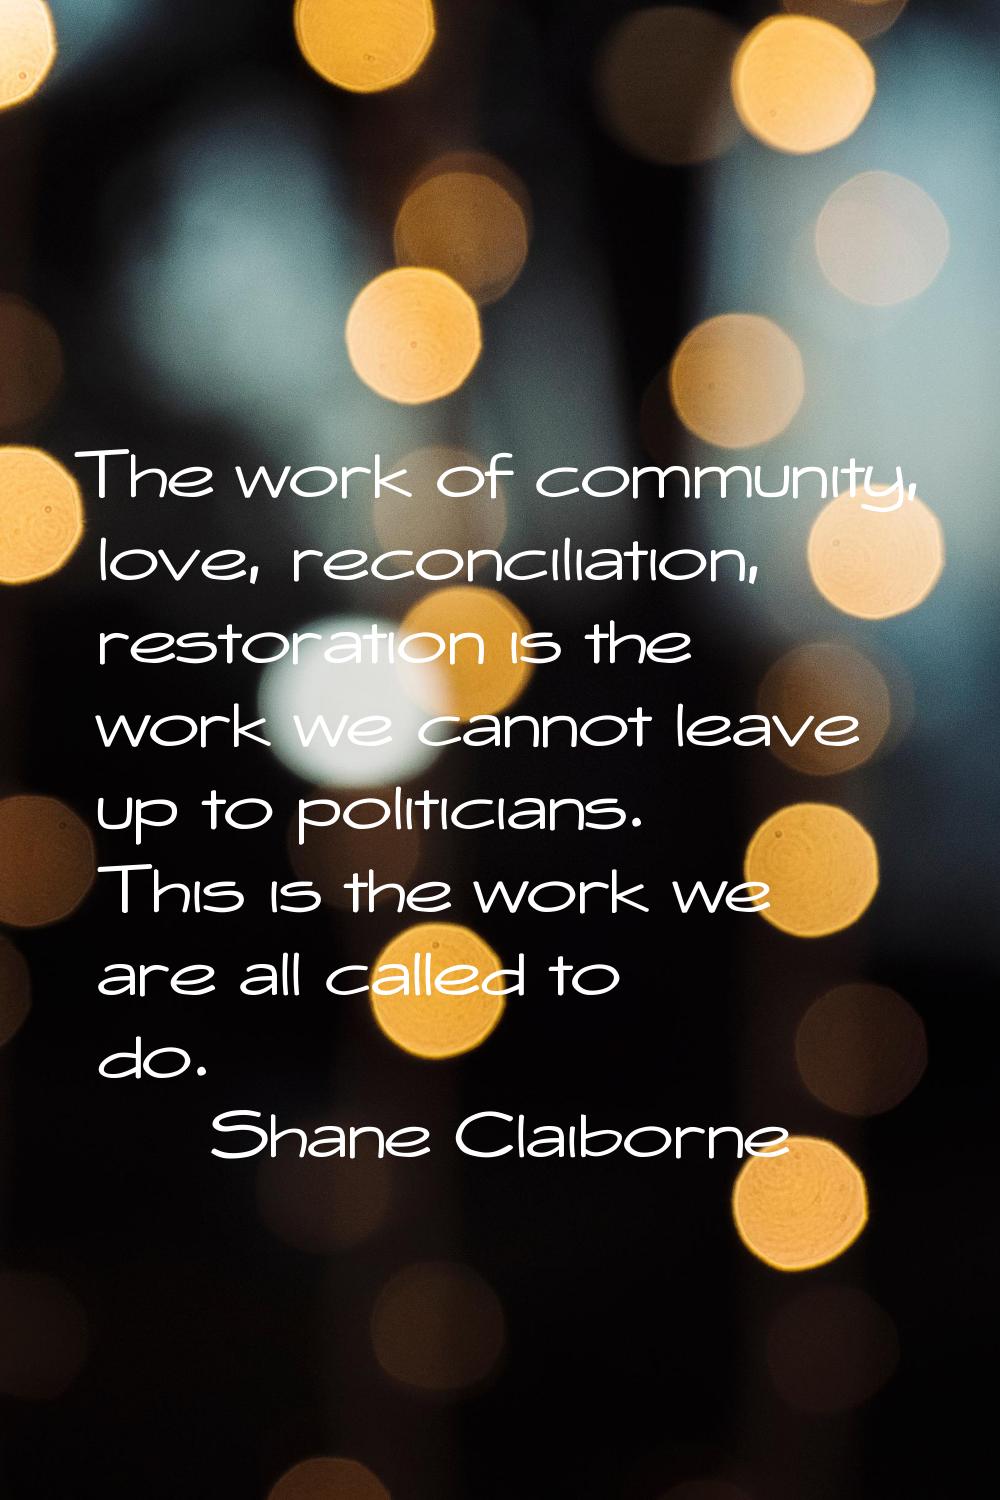 The work of community, love, reconciliation, restoration is the work we cannot leave up to politici